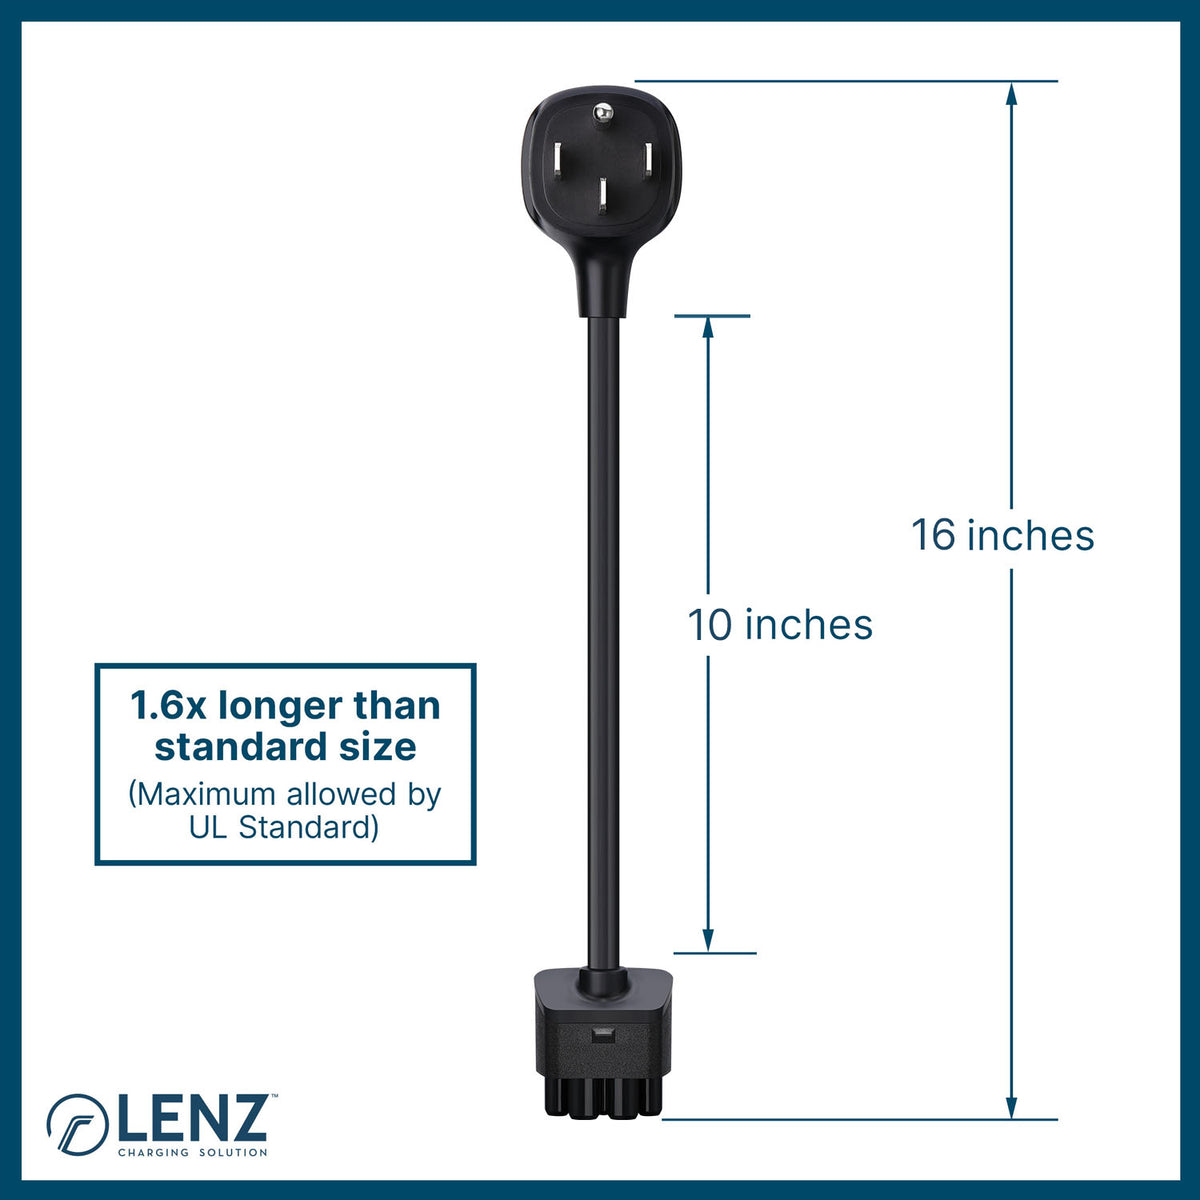 LENZ NEMA 14-50 Adapter for Tesla Gen 2 Mobile Connector Measures 16 inches end-to-end. A shorter 10 inch standard version is available. 